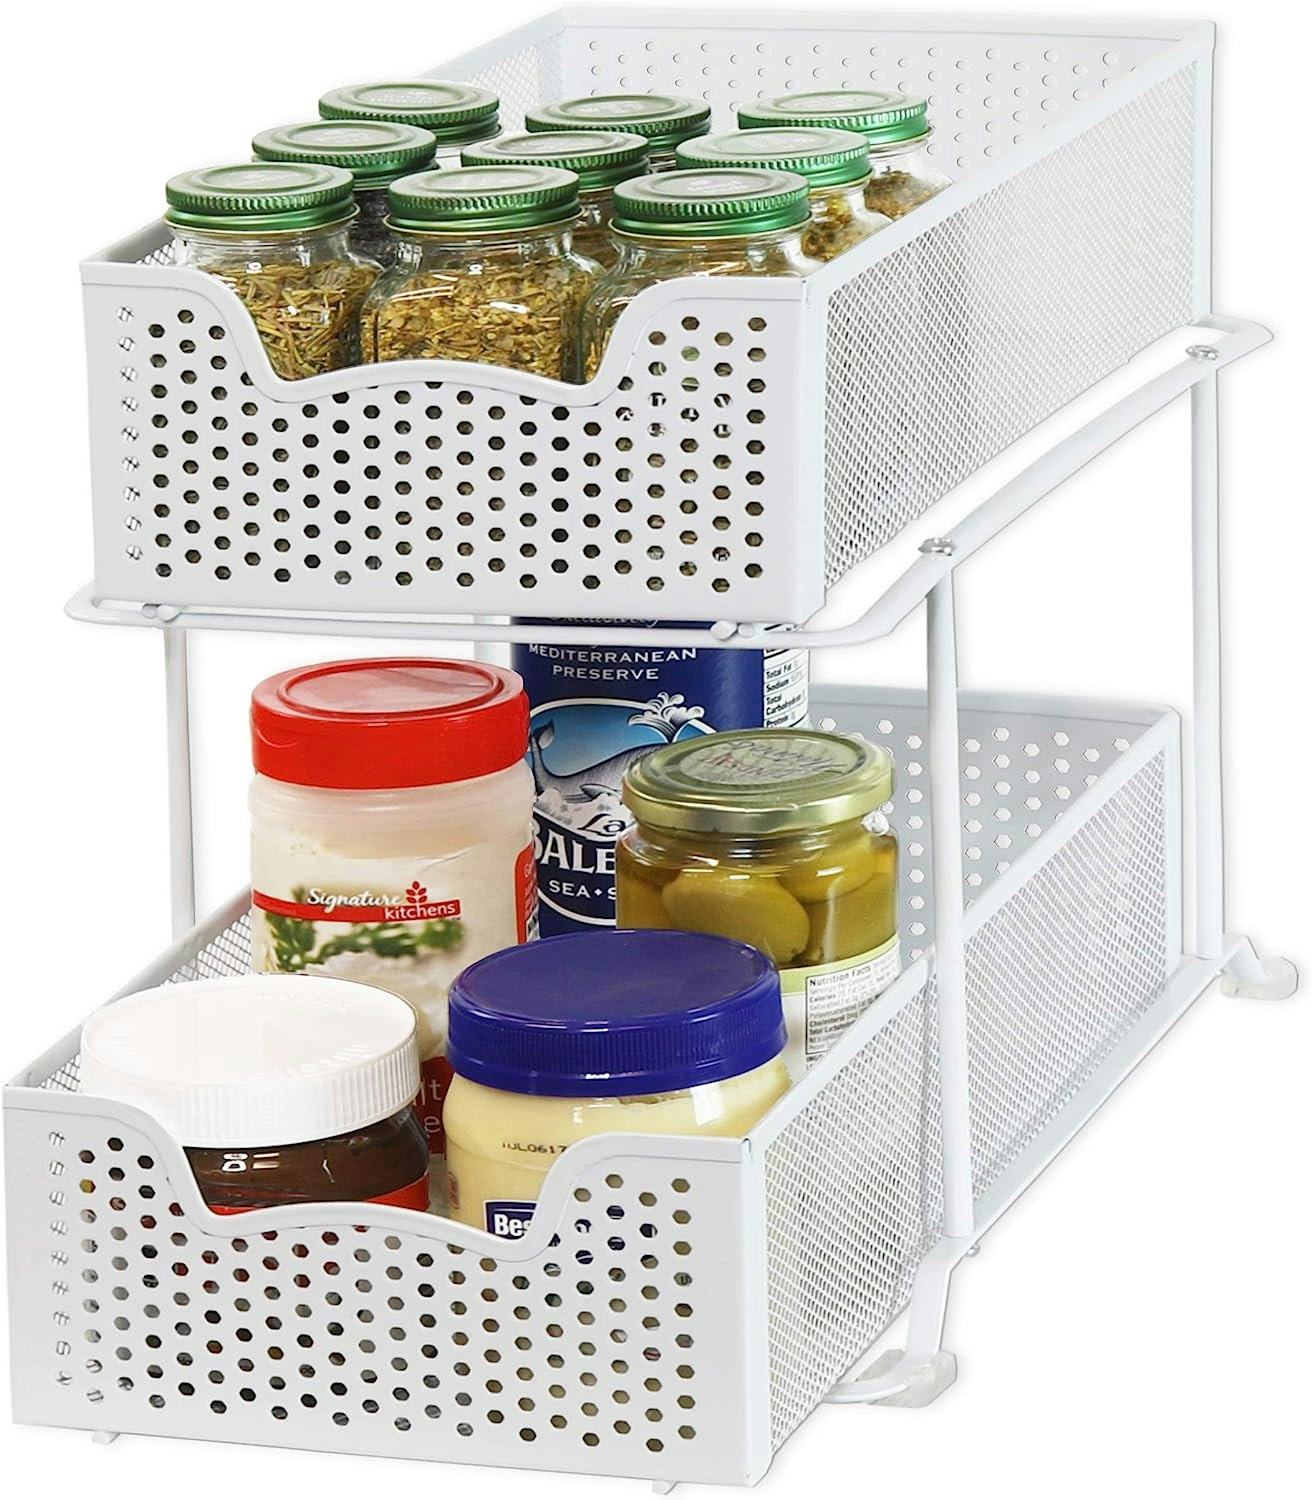 Skywin Plastic Stackable Storage Bins for Pantry - 6 Pack White Stackable Bins for Organizing Food, Kitchen, and Bathroom Essentials